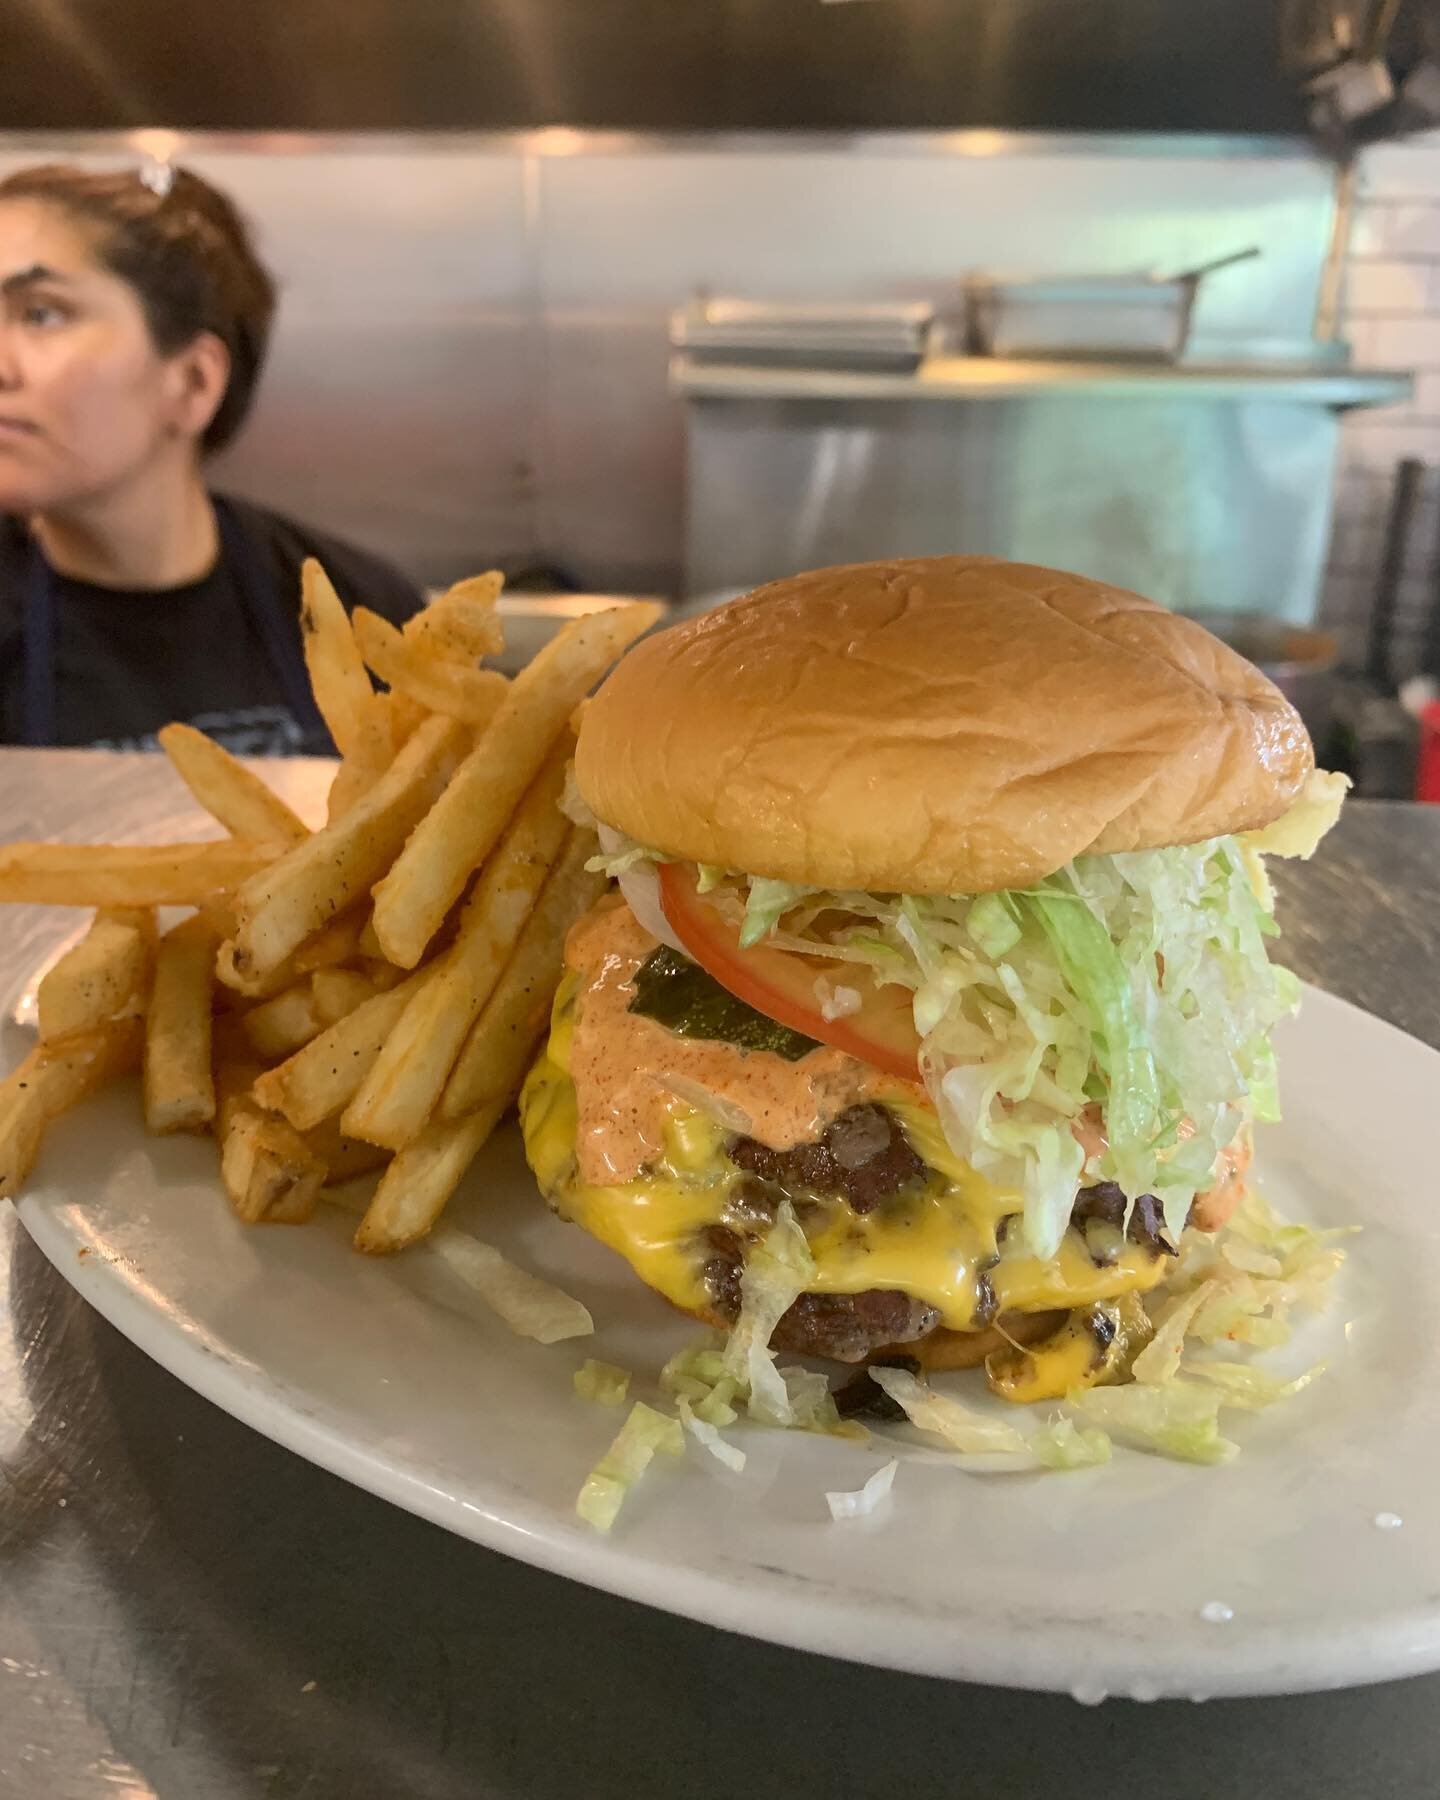 This big lou was looking so fine we just had to to be a paparazzi about it 📸 come on by today and see for yourself 👀 The gram really doesn&rsquo;t do it justice 💪🏻 open from 11-3 today. Order by the phone ☎️ online 📲 or even get it delivered wit